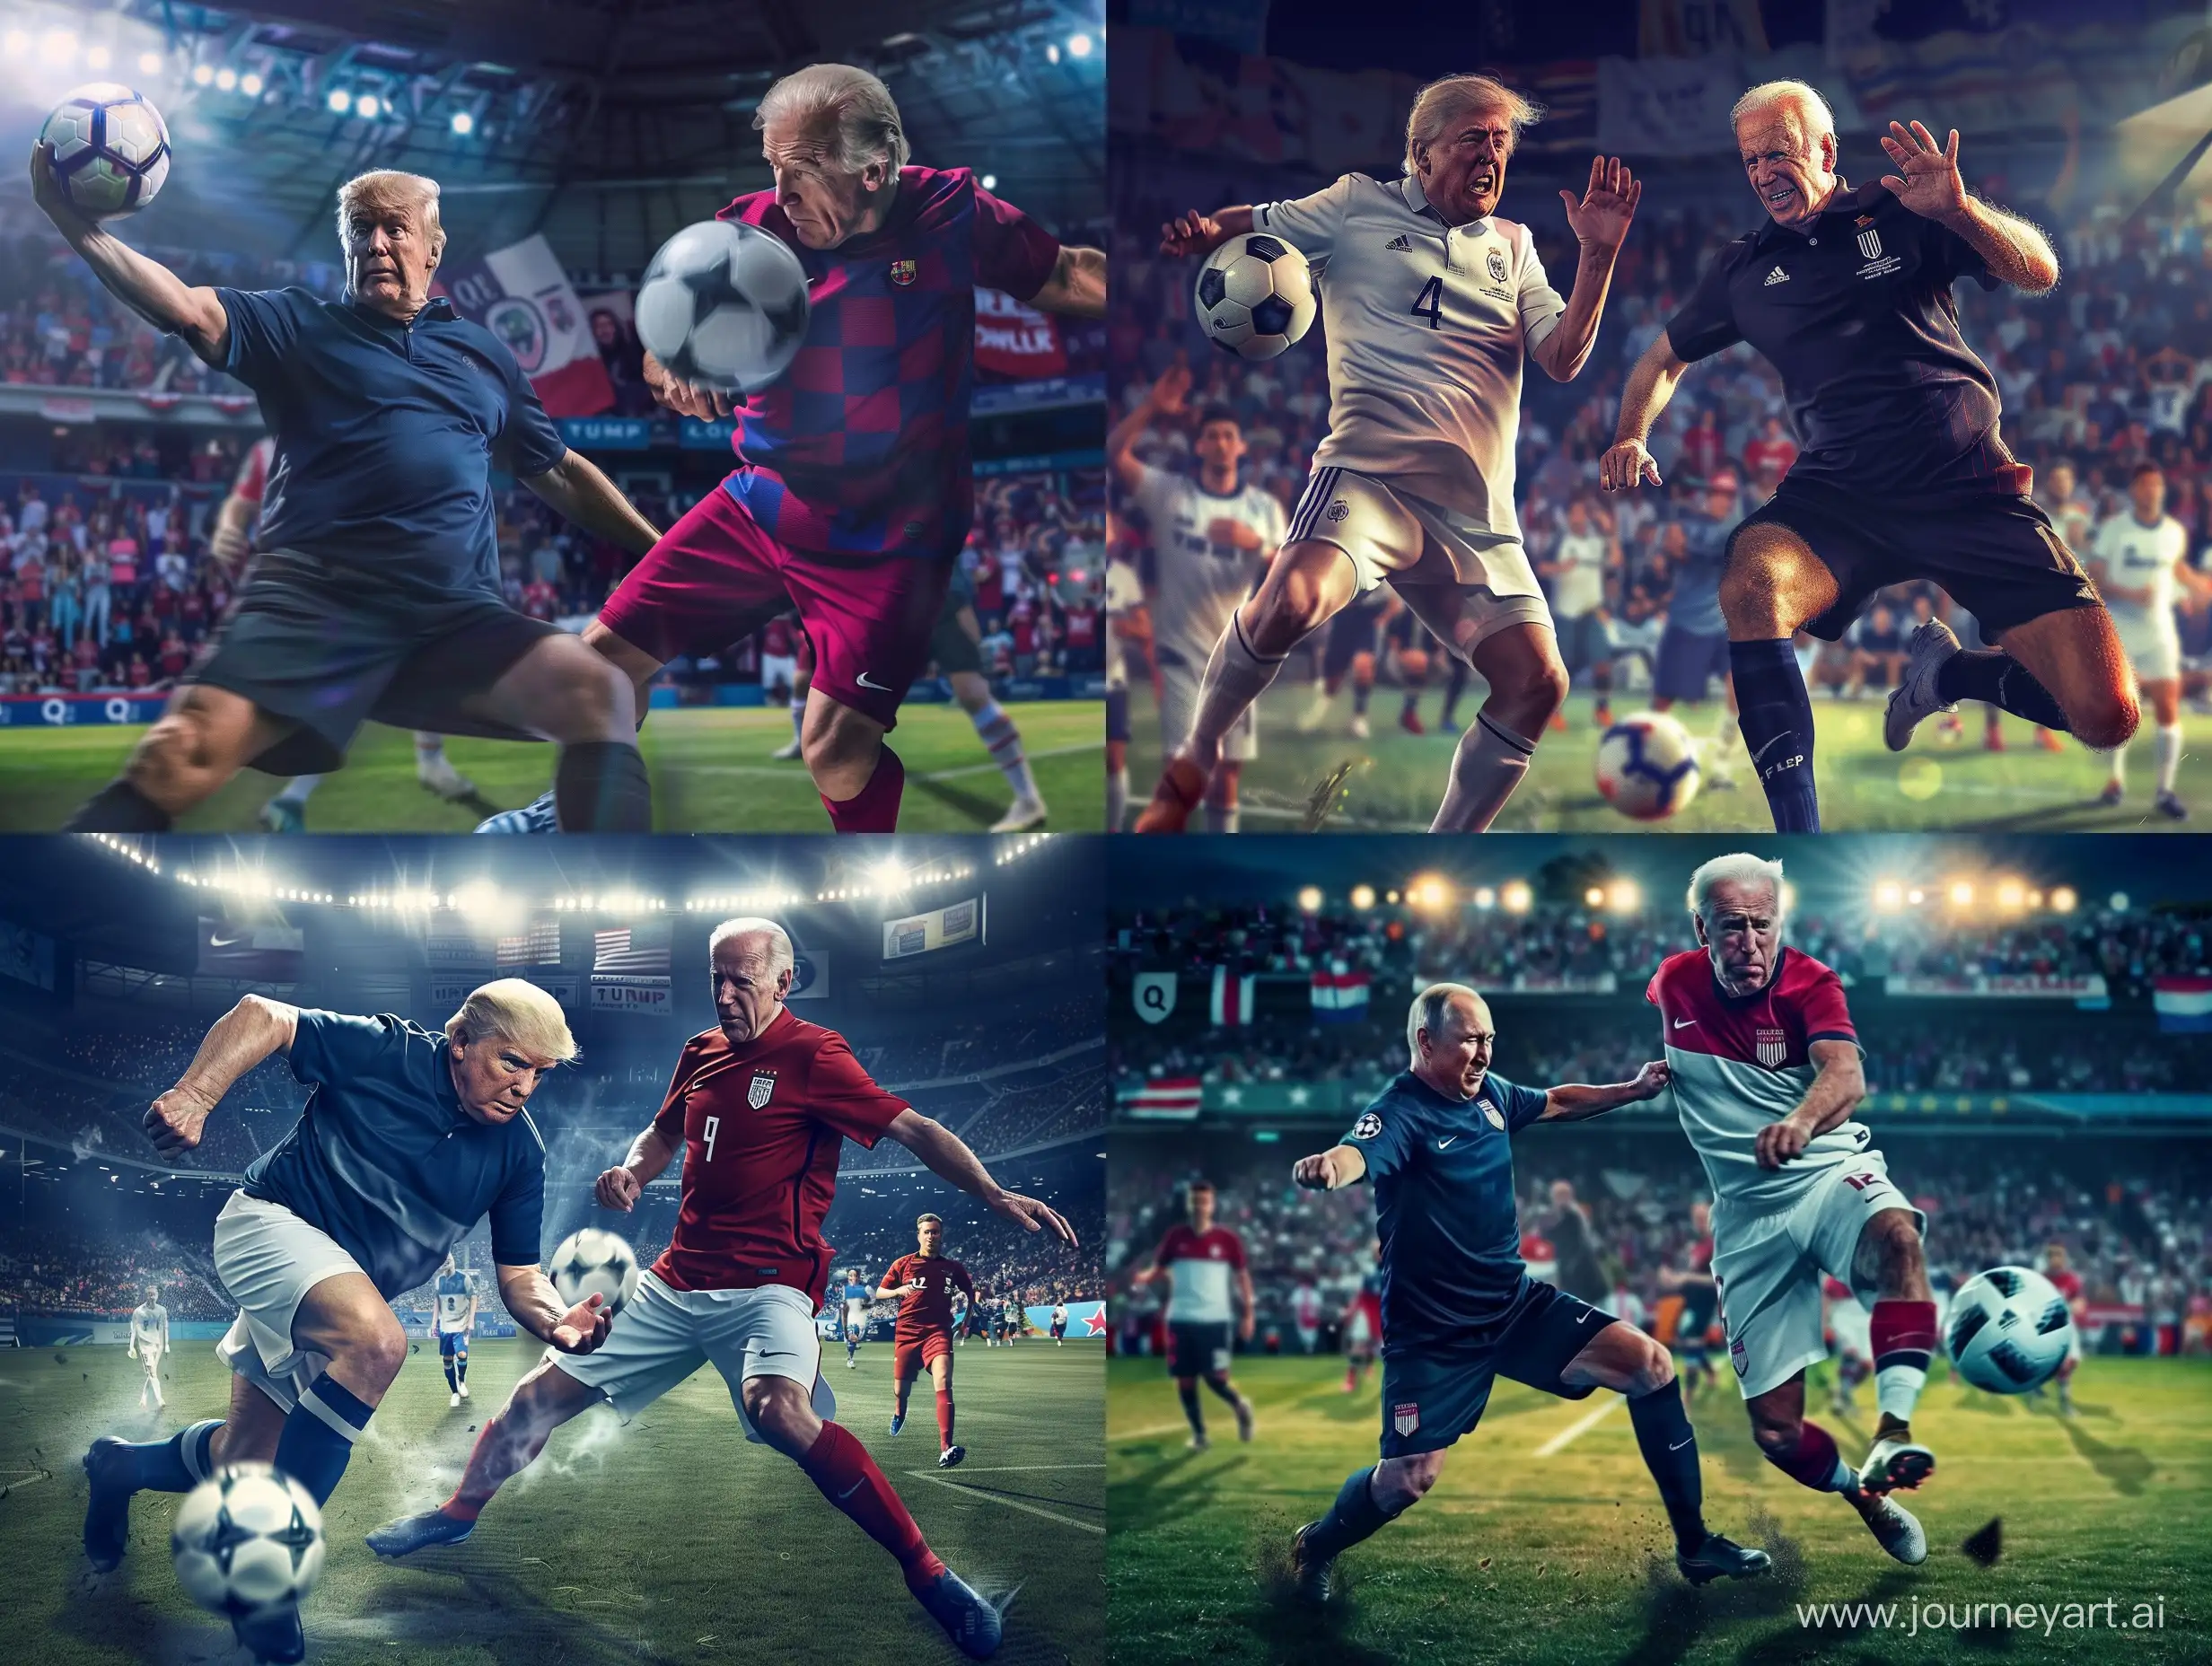 Donald Trump in soccer football game VS Joe Biden shooting the ball, in sportswear, full body, background of fans of both teams on stadium seats with different attractive elements, at night, realistic, sports lighting, q2